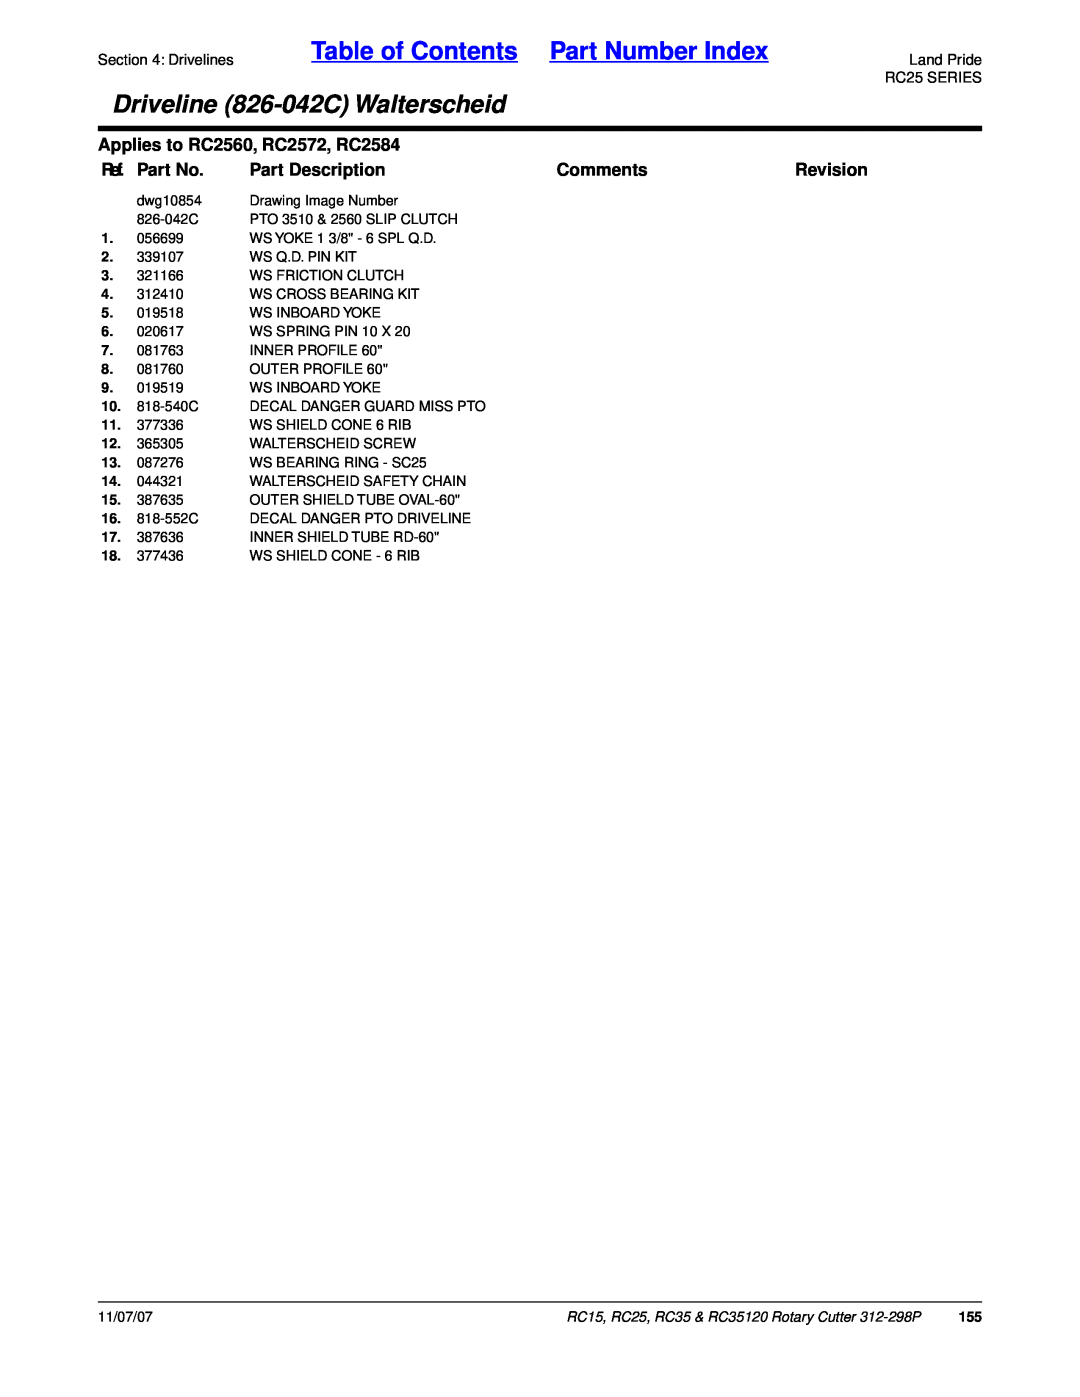 Land Pride RC15 Table of Contents Part Number Index, Driveline 826-042CWalterscheid, Applies to RC2560, RC2572, RC2584 